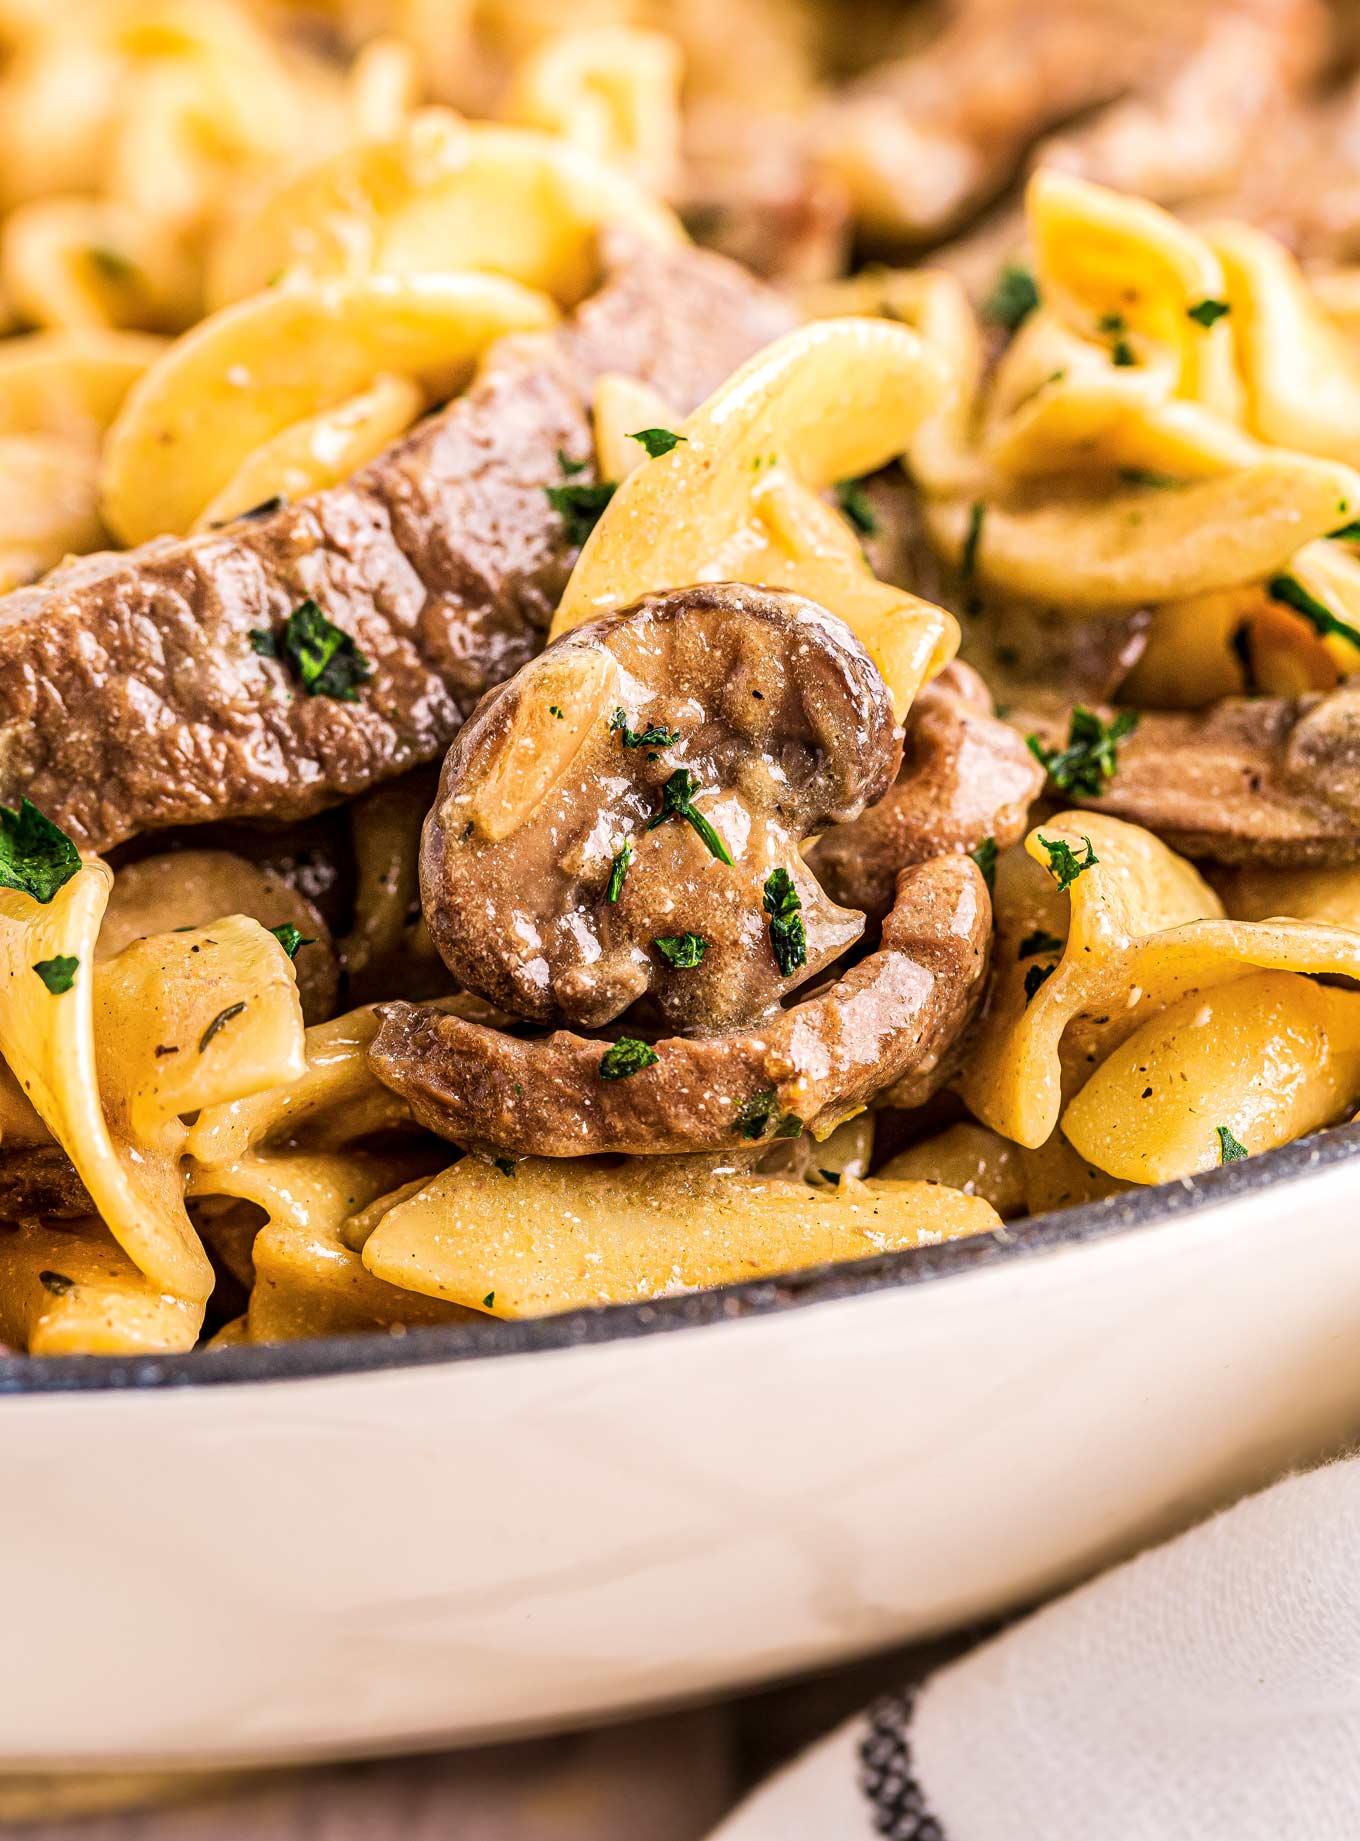 Ultimate Beef Stroganoff Minute Recipe The Chunky Chef